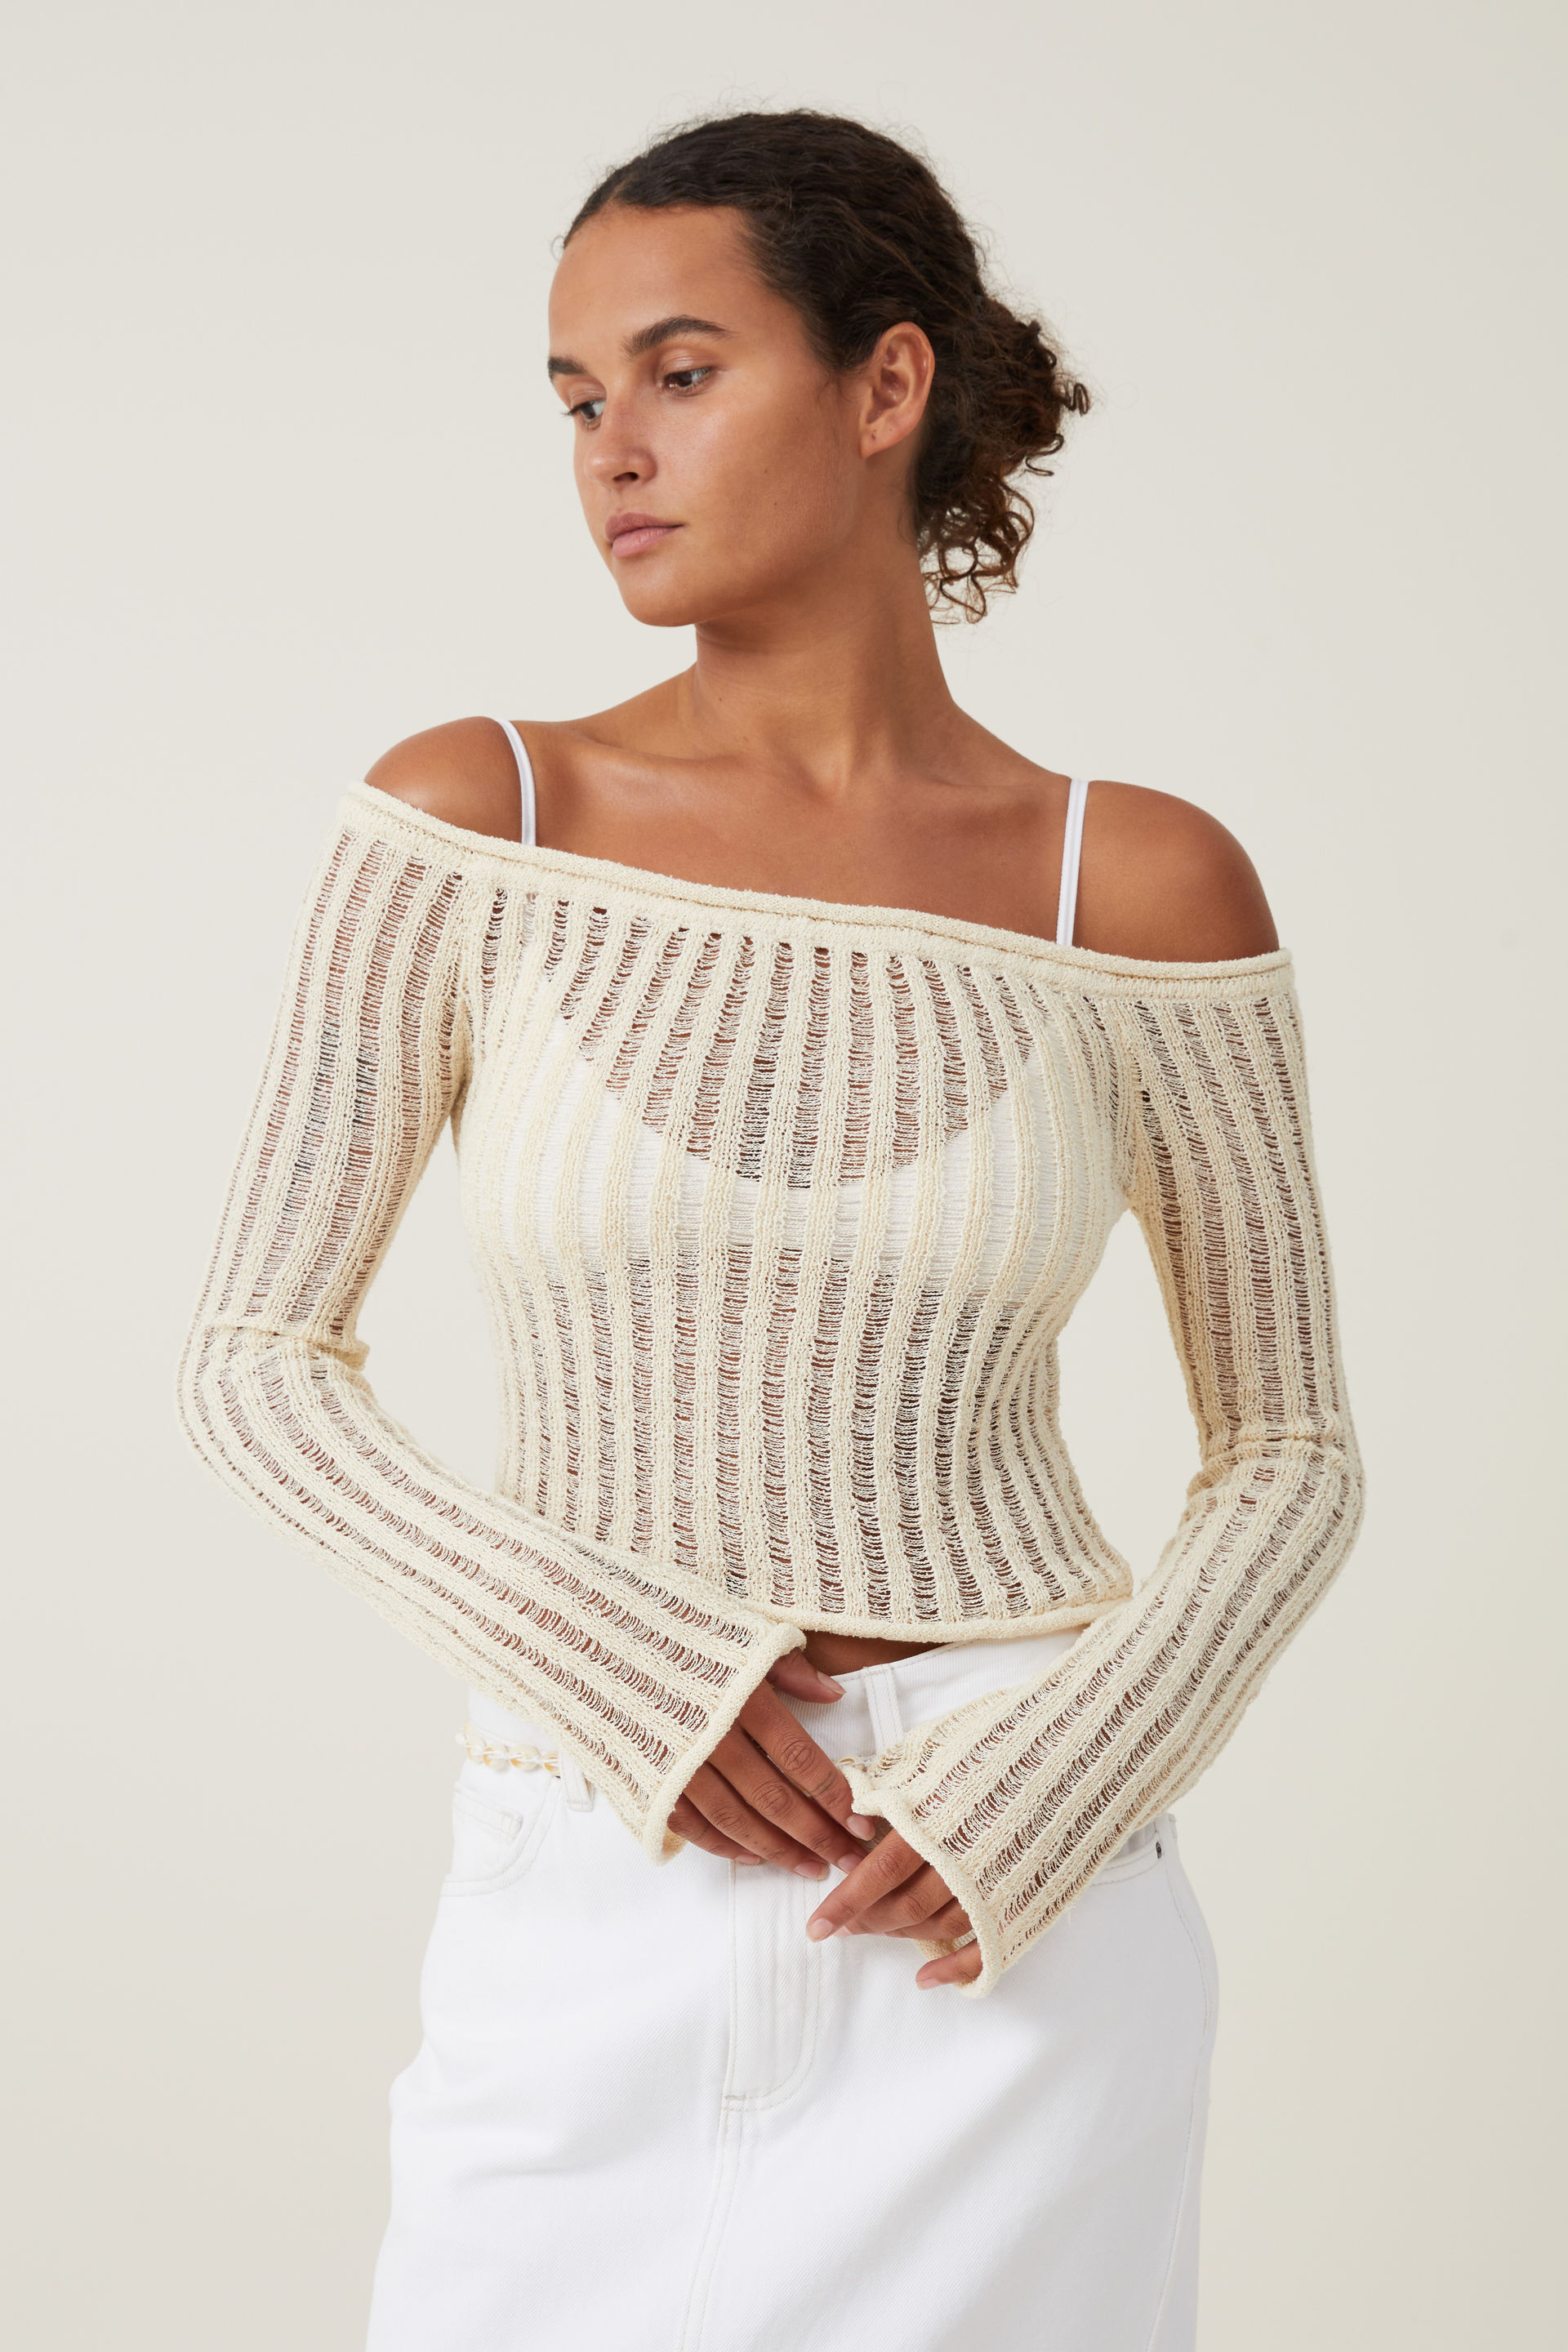 Women's Sweaters & Cardigans | Cotton On USA